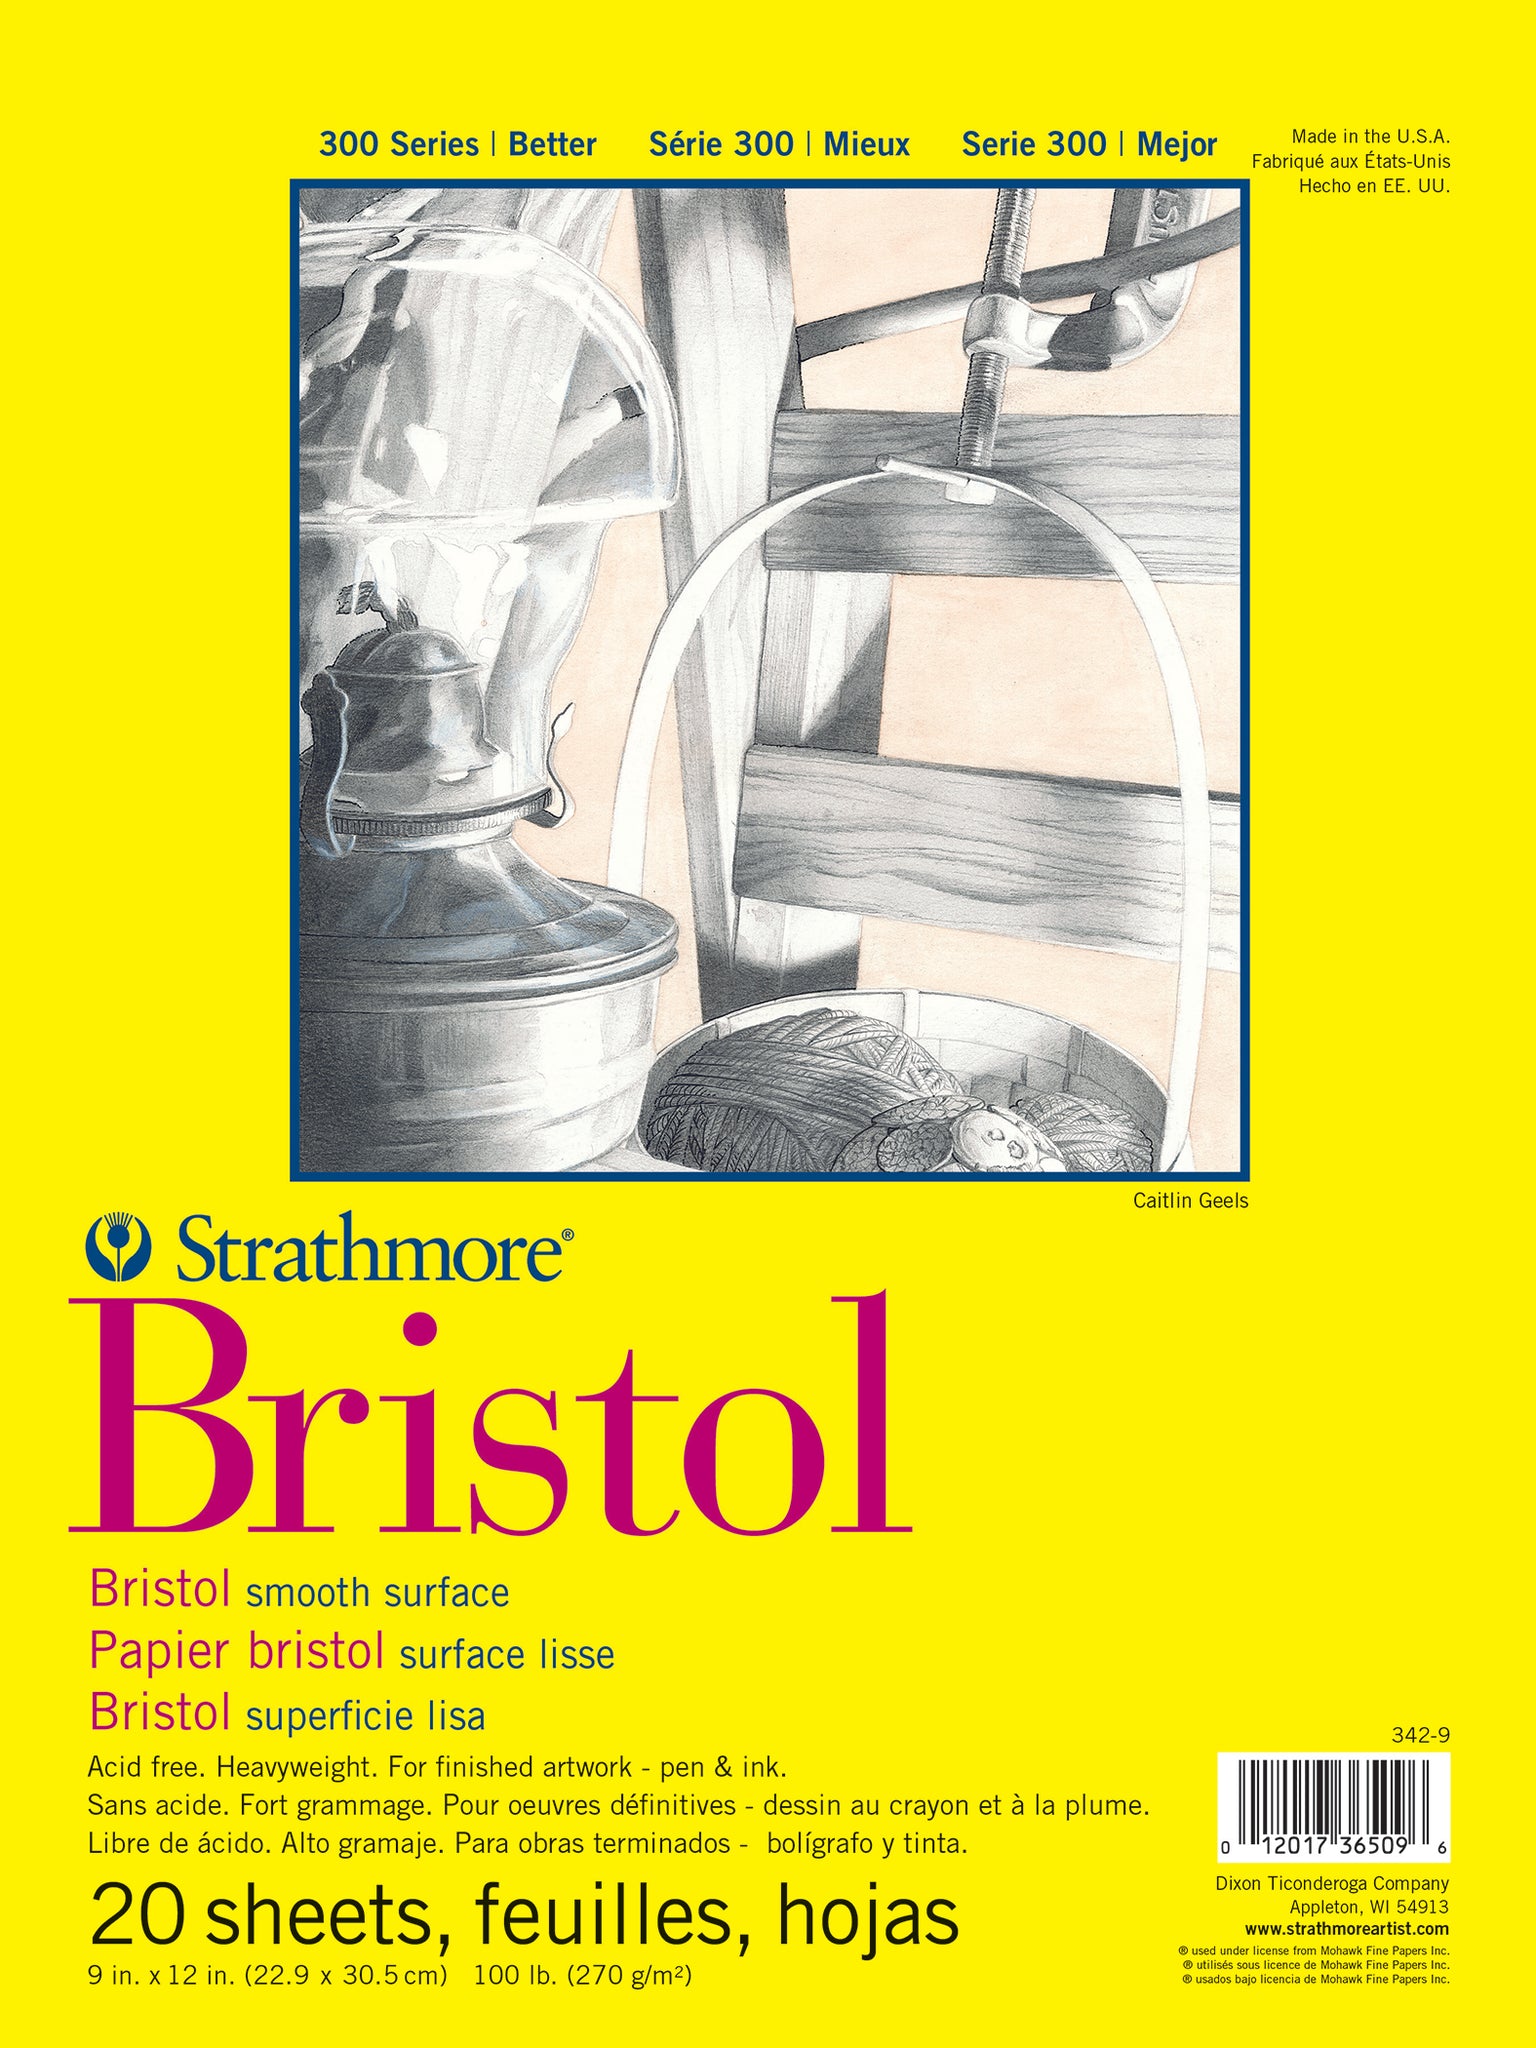 Bristol Vellum Surface 300 Paper by Strathmore - Multi Sizes